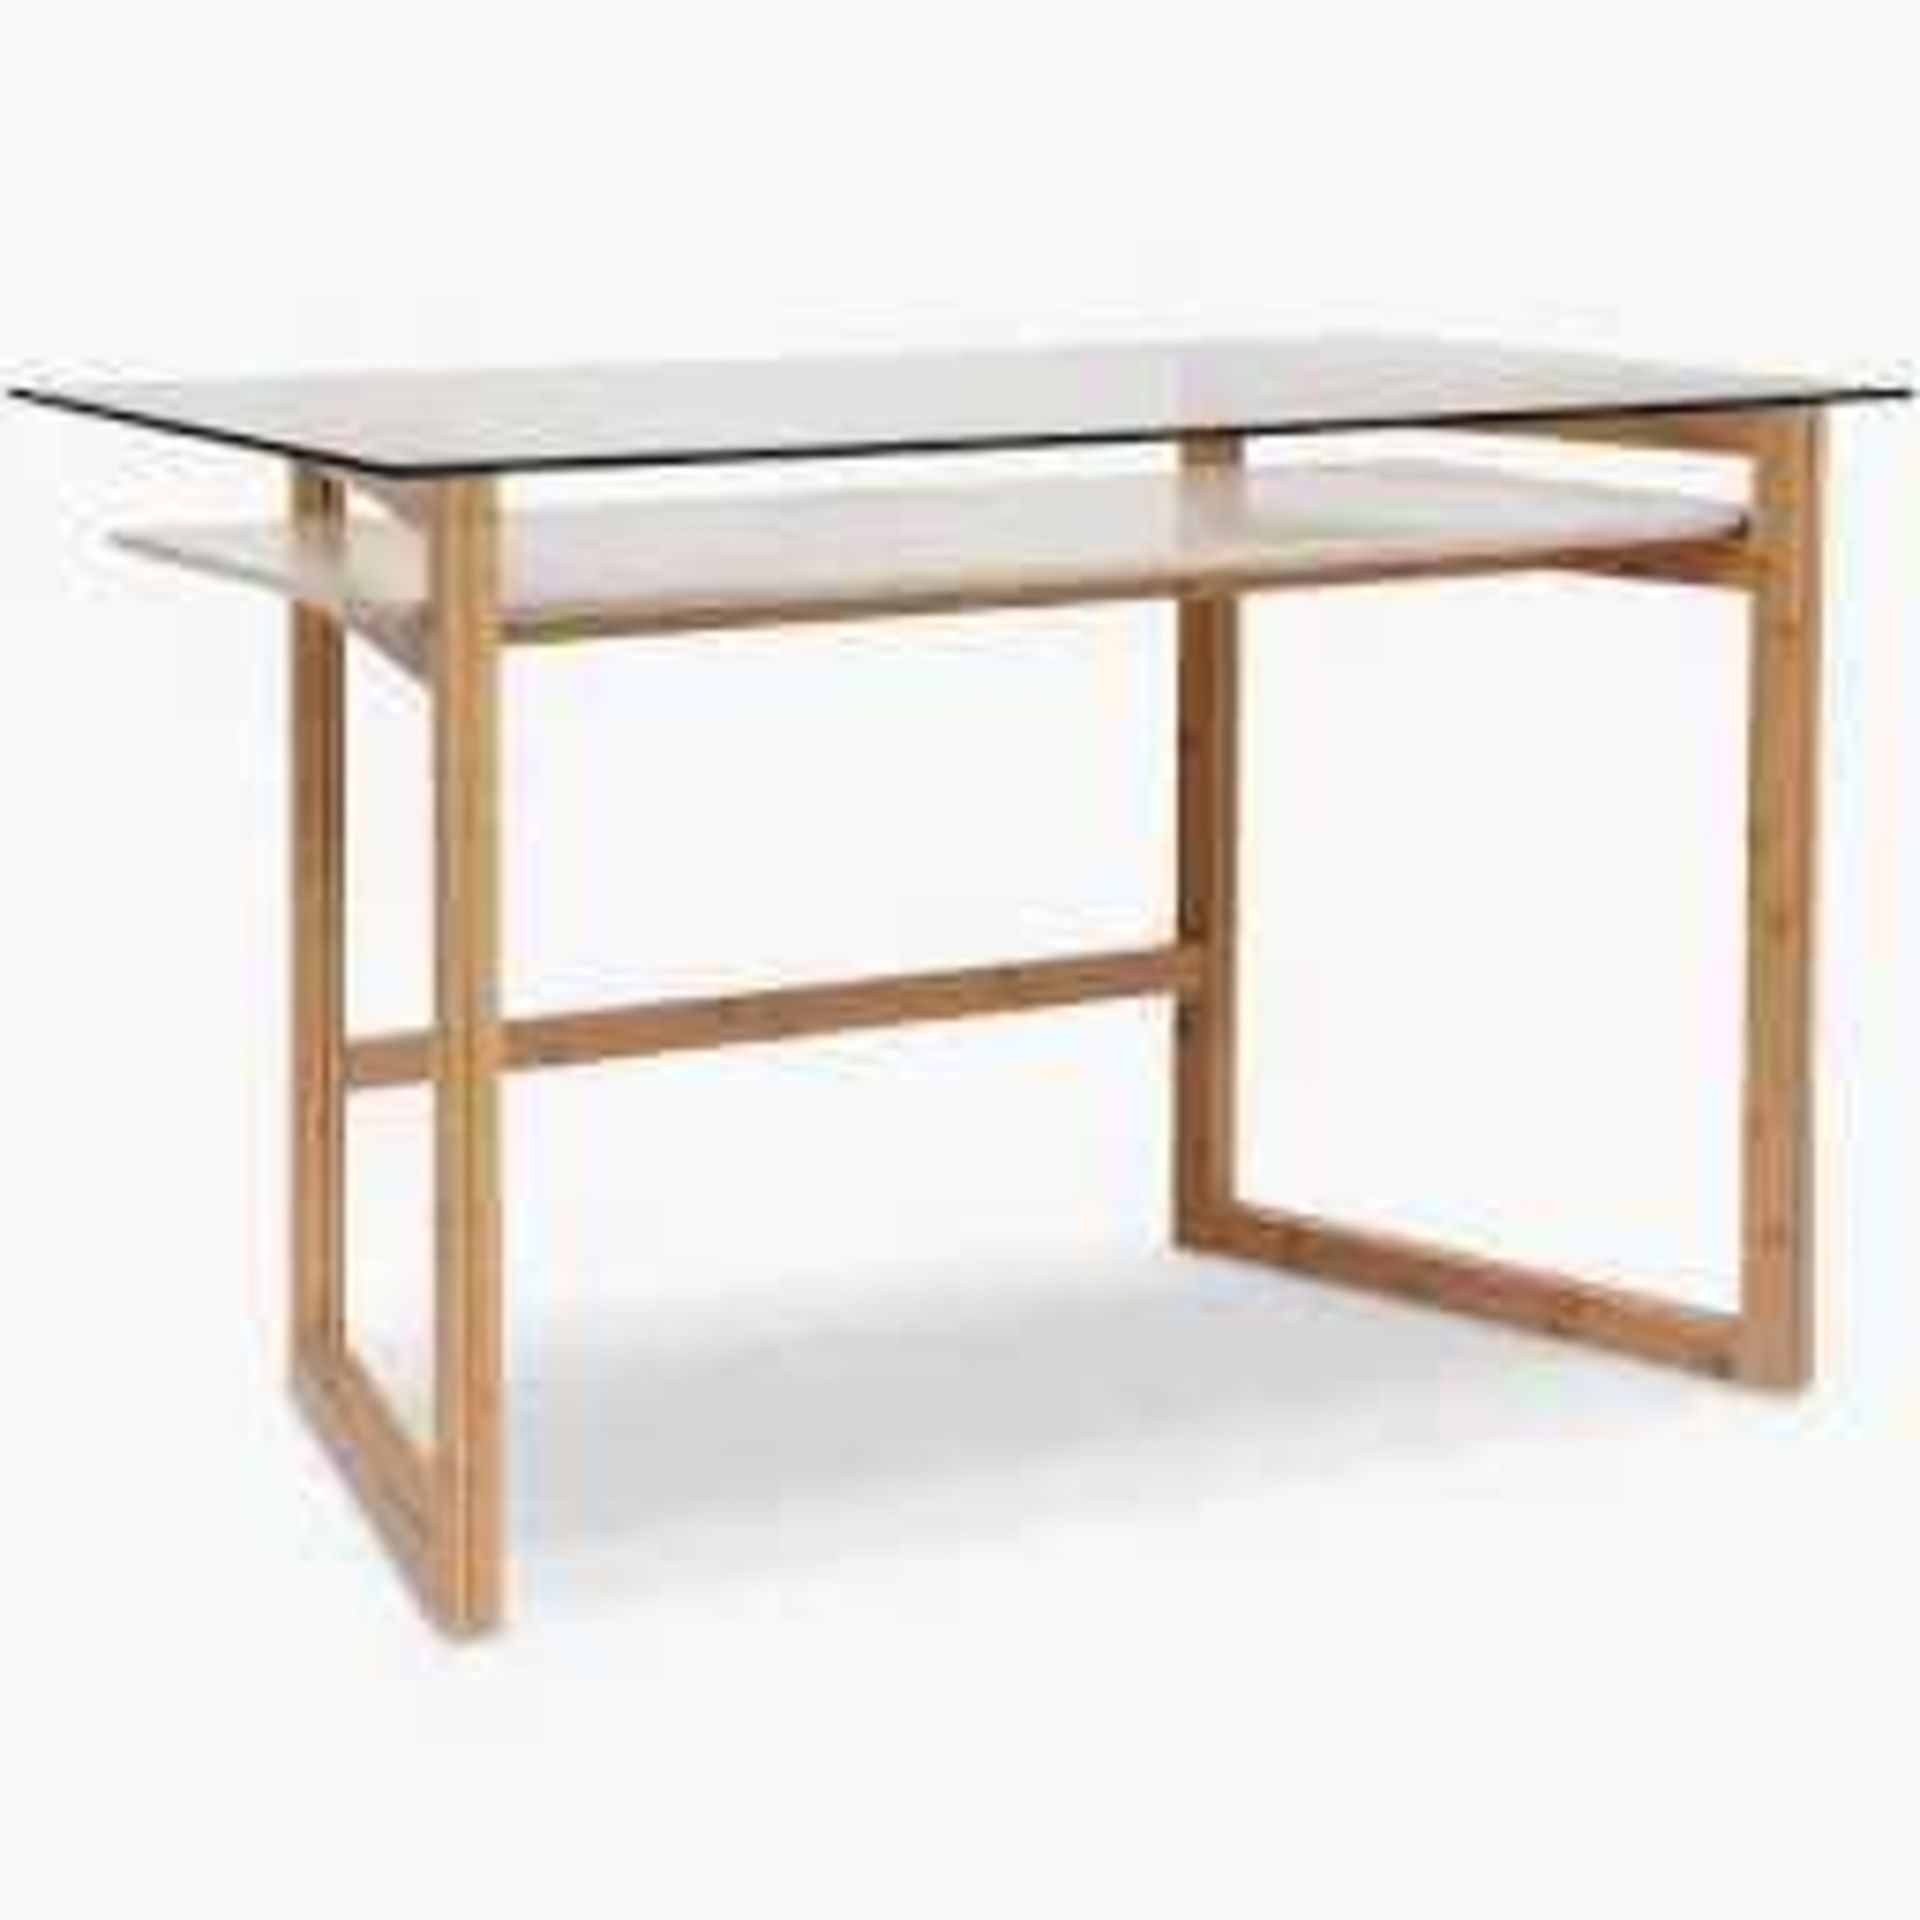 RRP £200 Boxed John Lewis And Partner Tropez Bamboo And Almond Wooden Desk With Glass (Appraisals